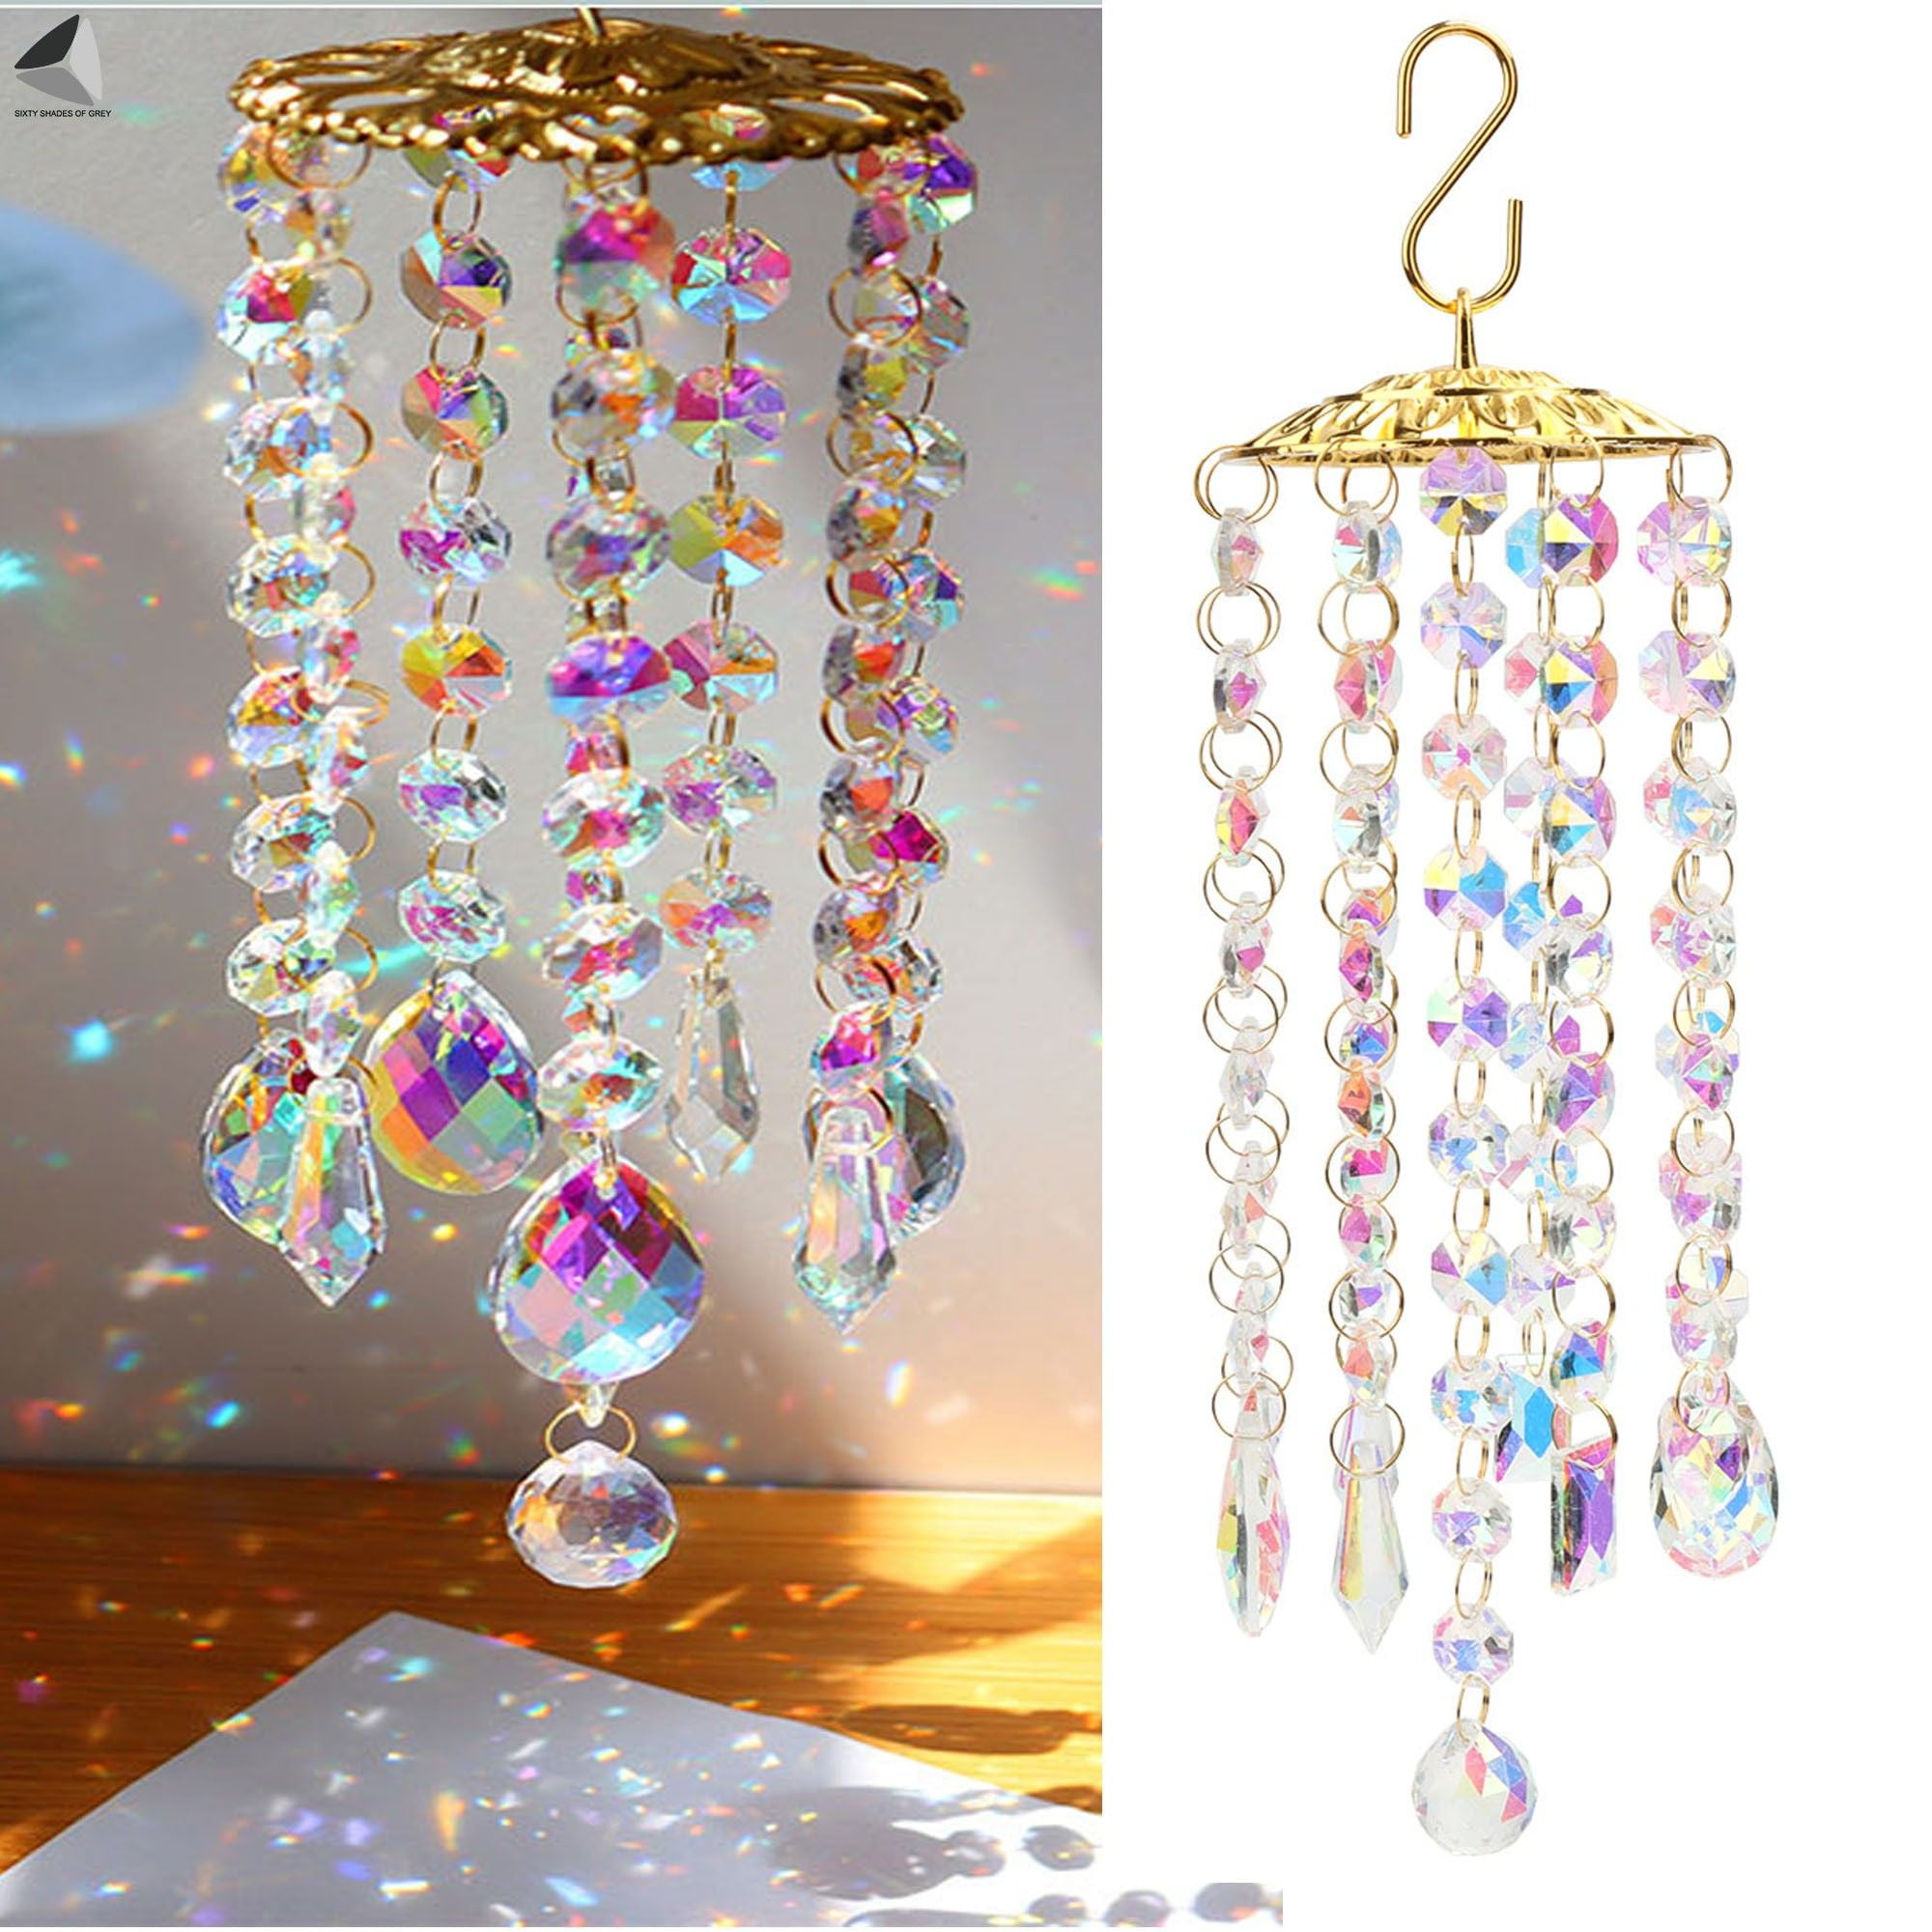 Crystal Windchimes Unique Outdoor Clearance Solar Wind Chimes Gifts Crystal Suncatcher Hanging Décor Rainbow Maker Crystal Prisms Hanging Crystals Ornament 